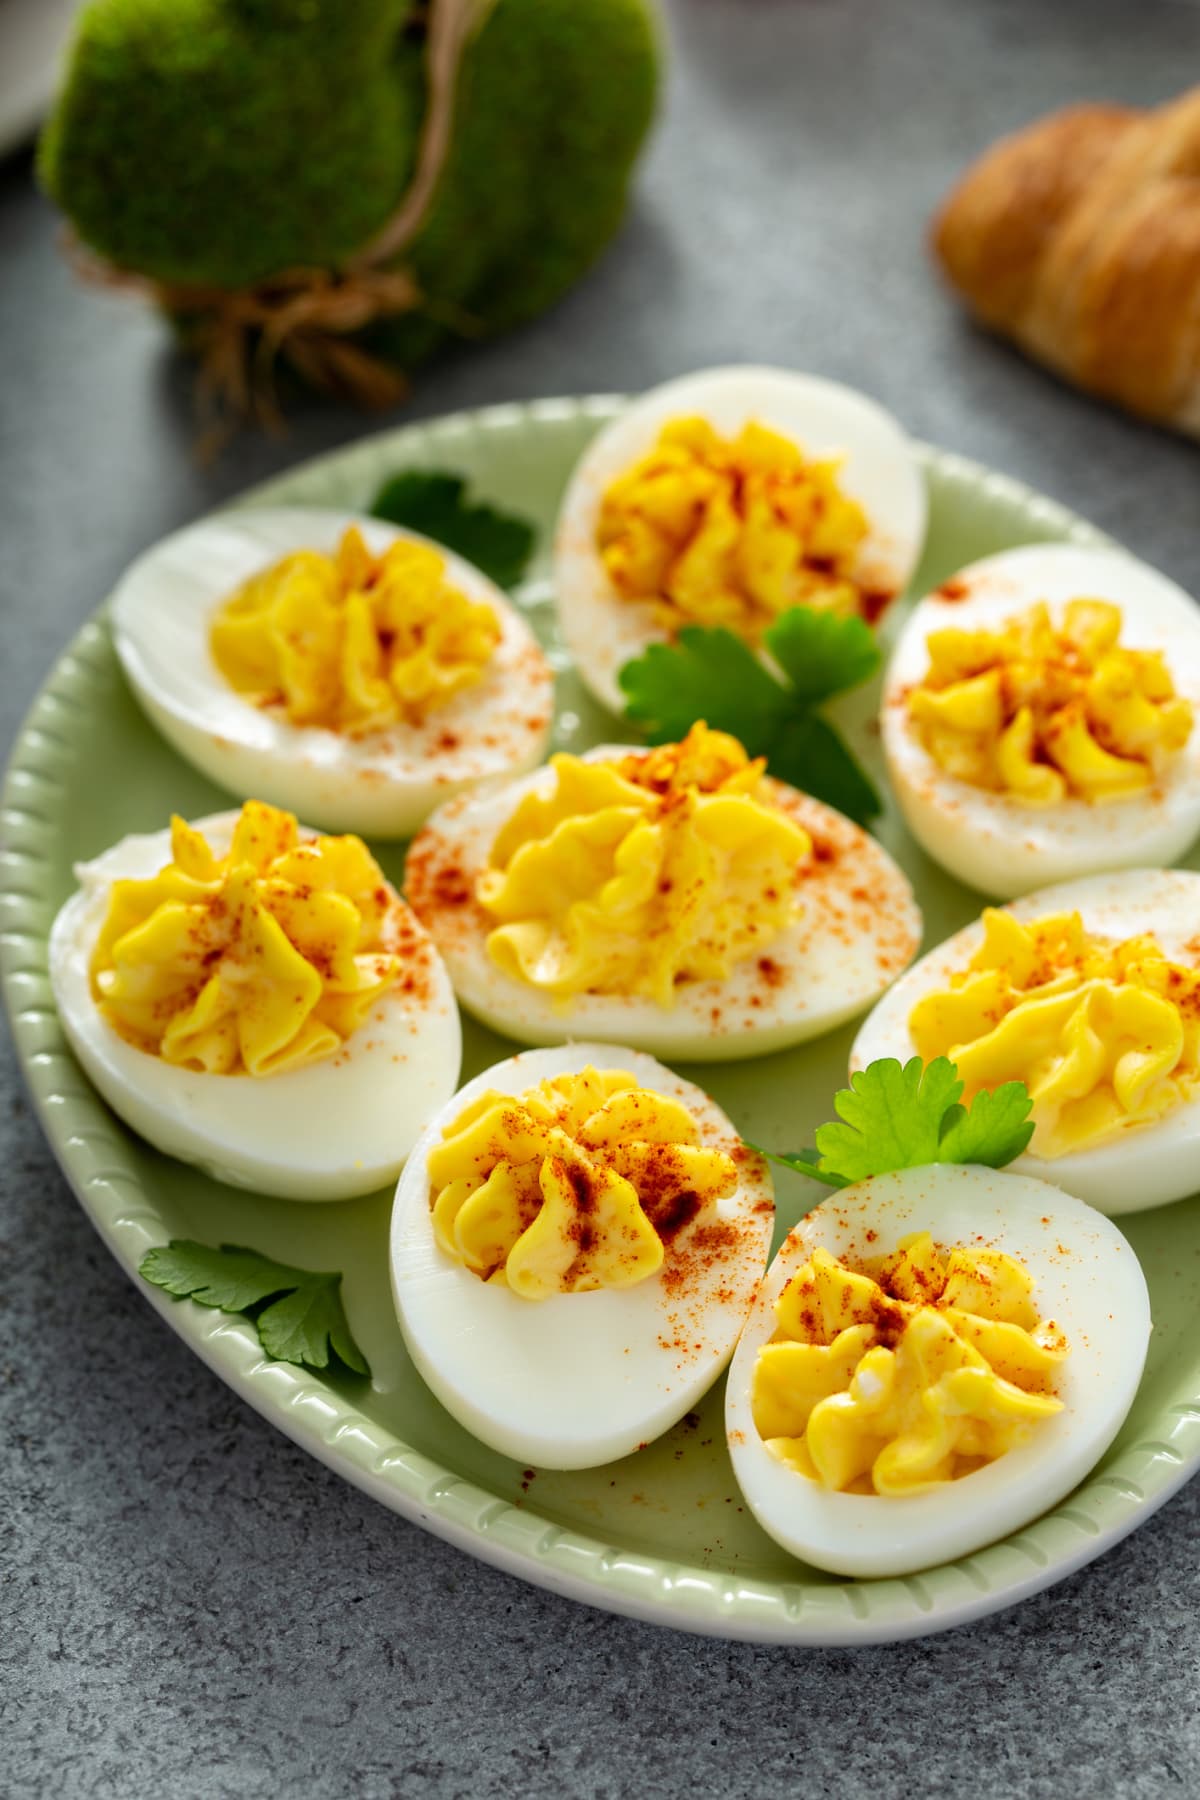 Deviled eggs with smoked paprika on a green plate